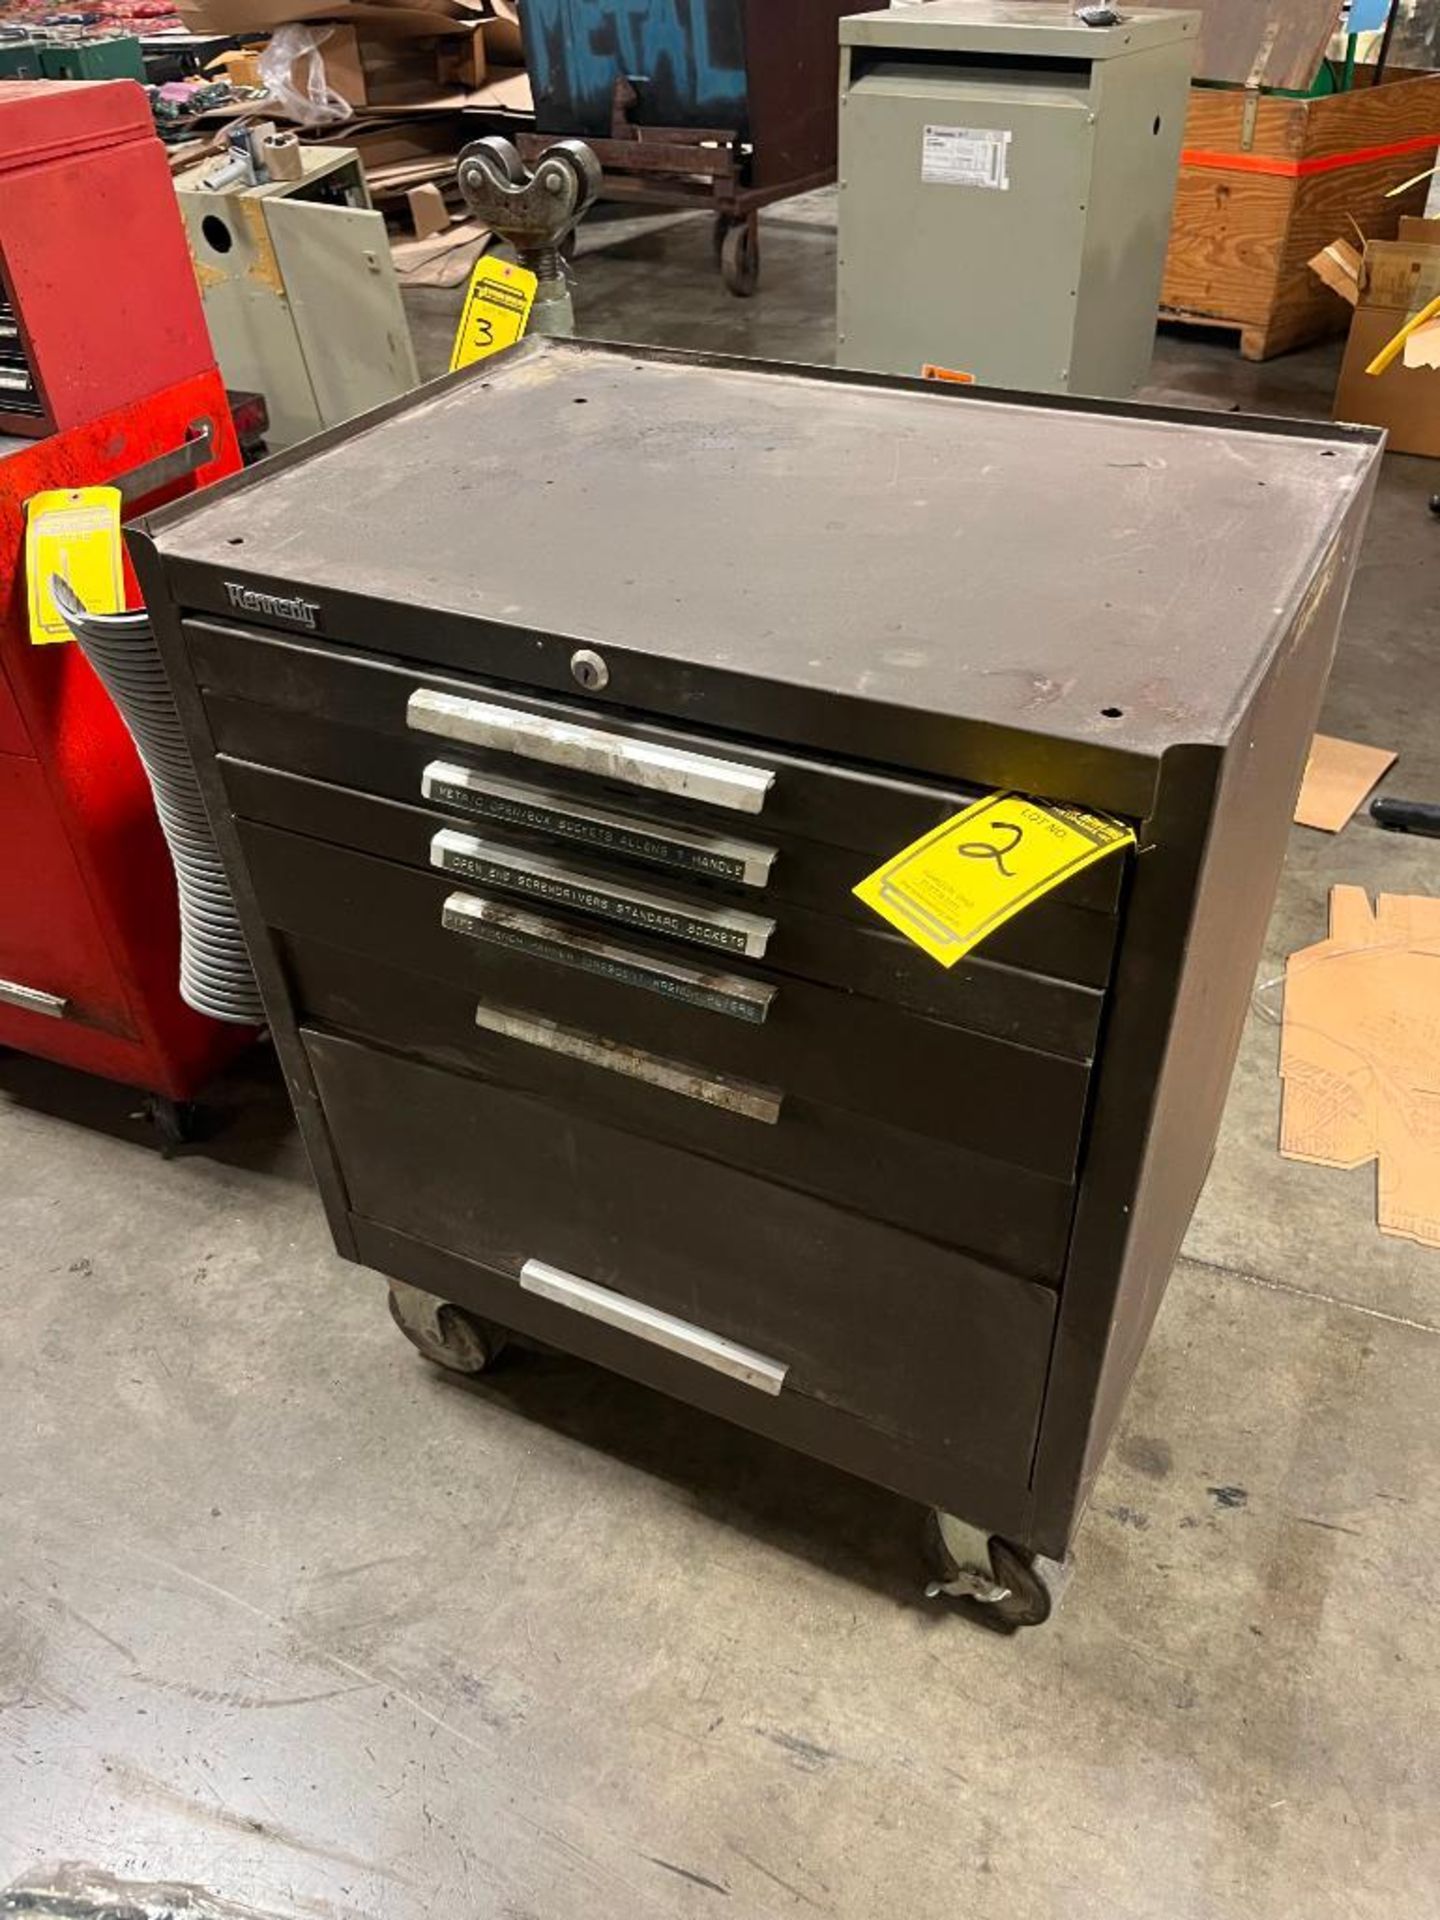 Kennedy 5-Drawer Rolling Toolbox